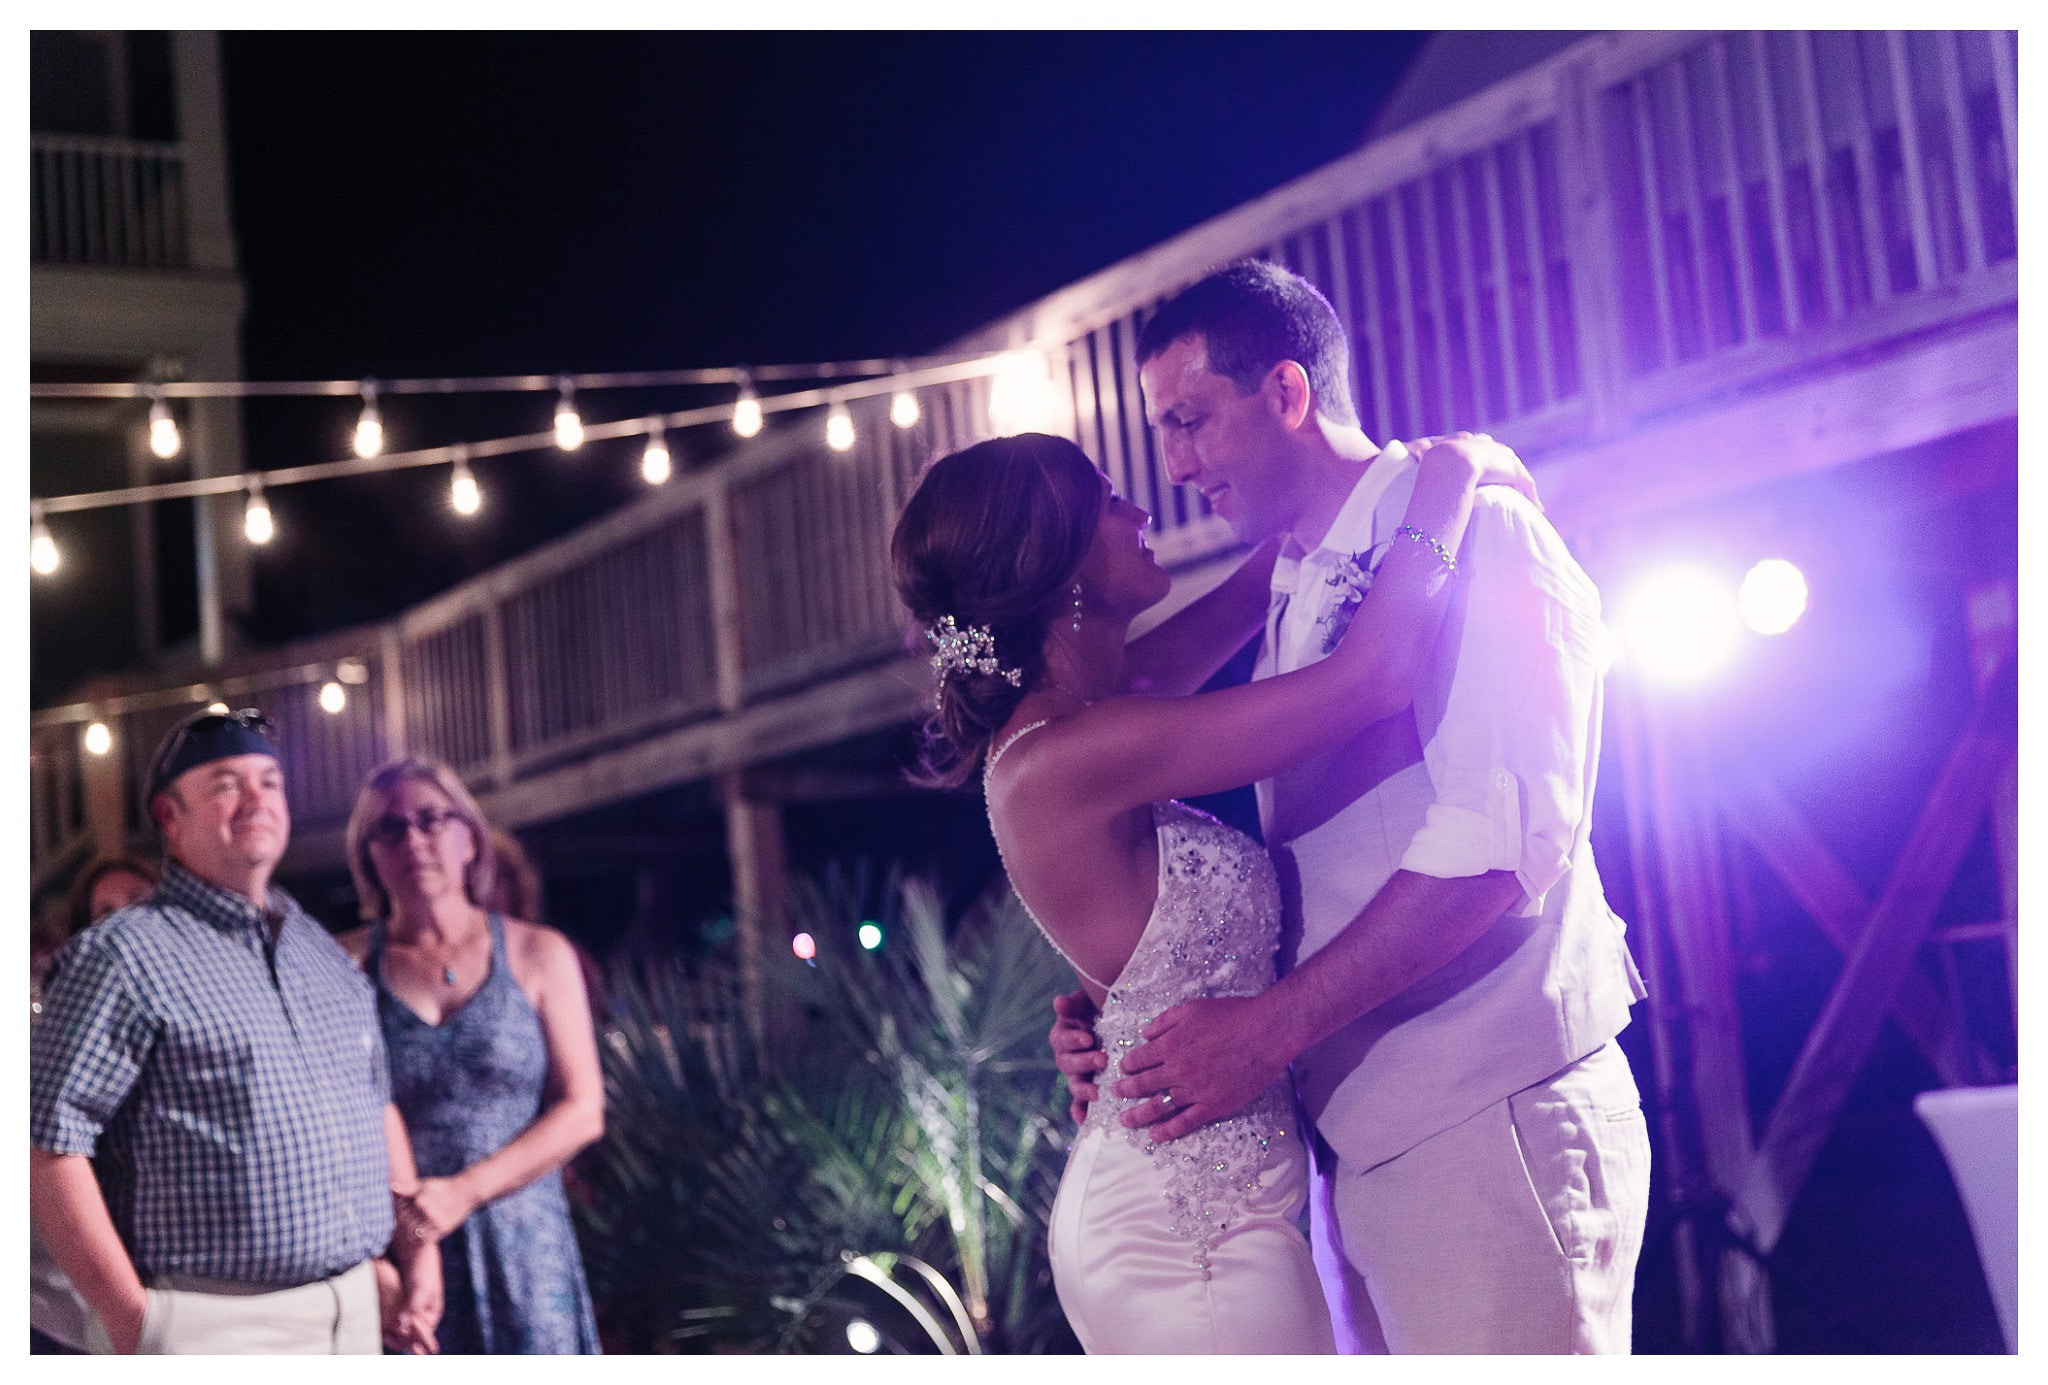 Bride and Groom Dancing the first dance together - Venue - Beach House Gulf Stream Breeze, Beach Realty Catering and Cake - Buttercream Cakes and Catering, LLC Flowers - Callas Florist Event Rentals - Event Works DJ - Scott Shaw